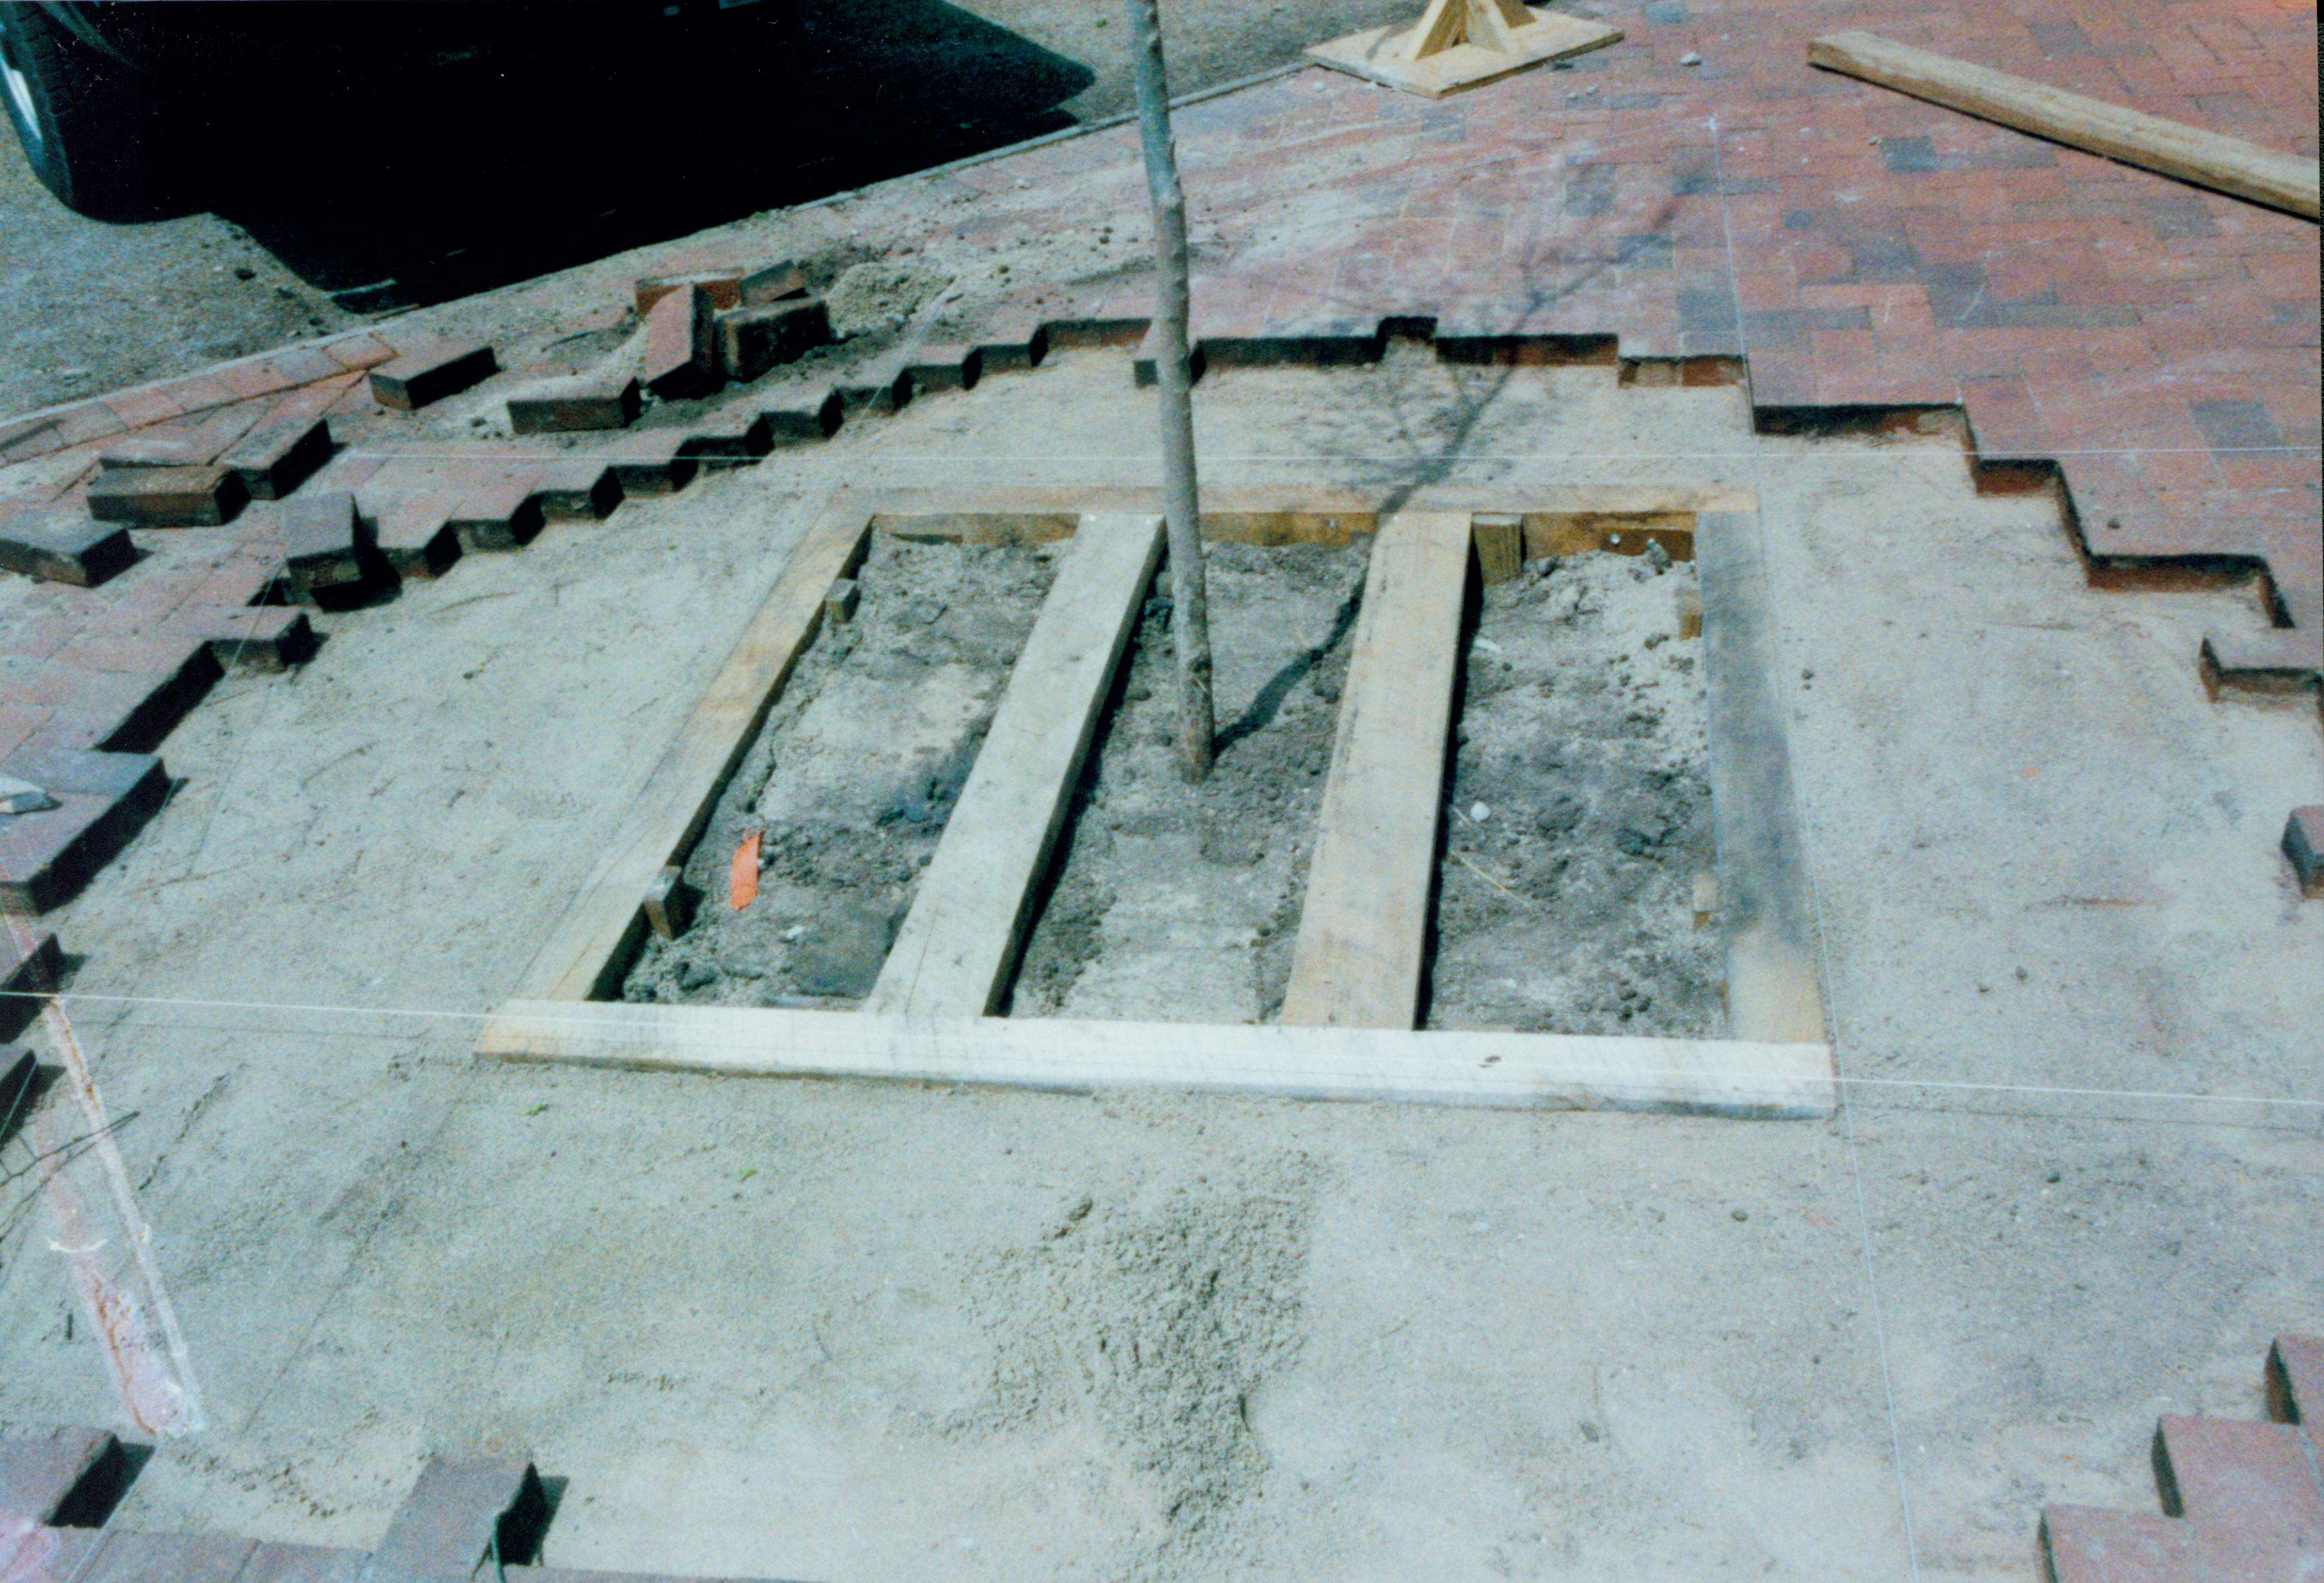 Elm tree replacement - new wooden base for new elm tree in brick plaza in front of Lincoln Home. Looking Northwest from brick plaza Elm tree, brick plaza, Lincoln Home